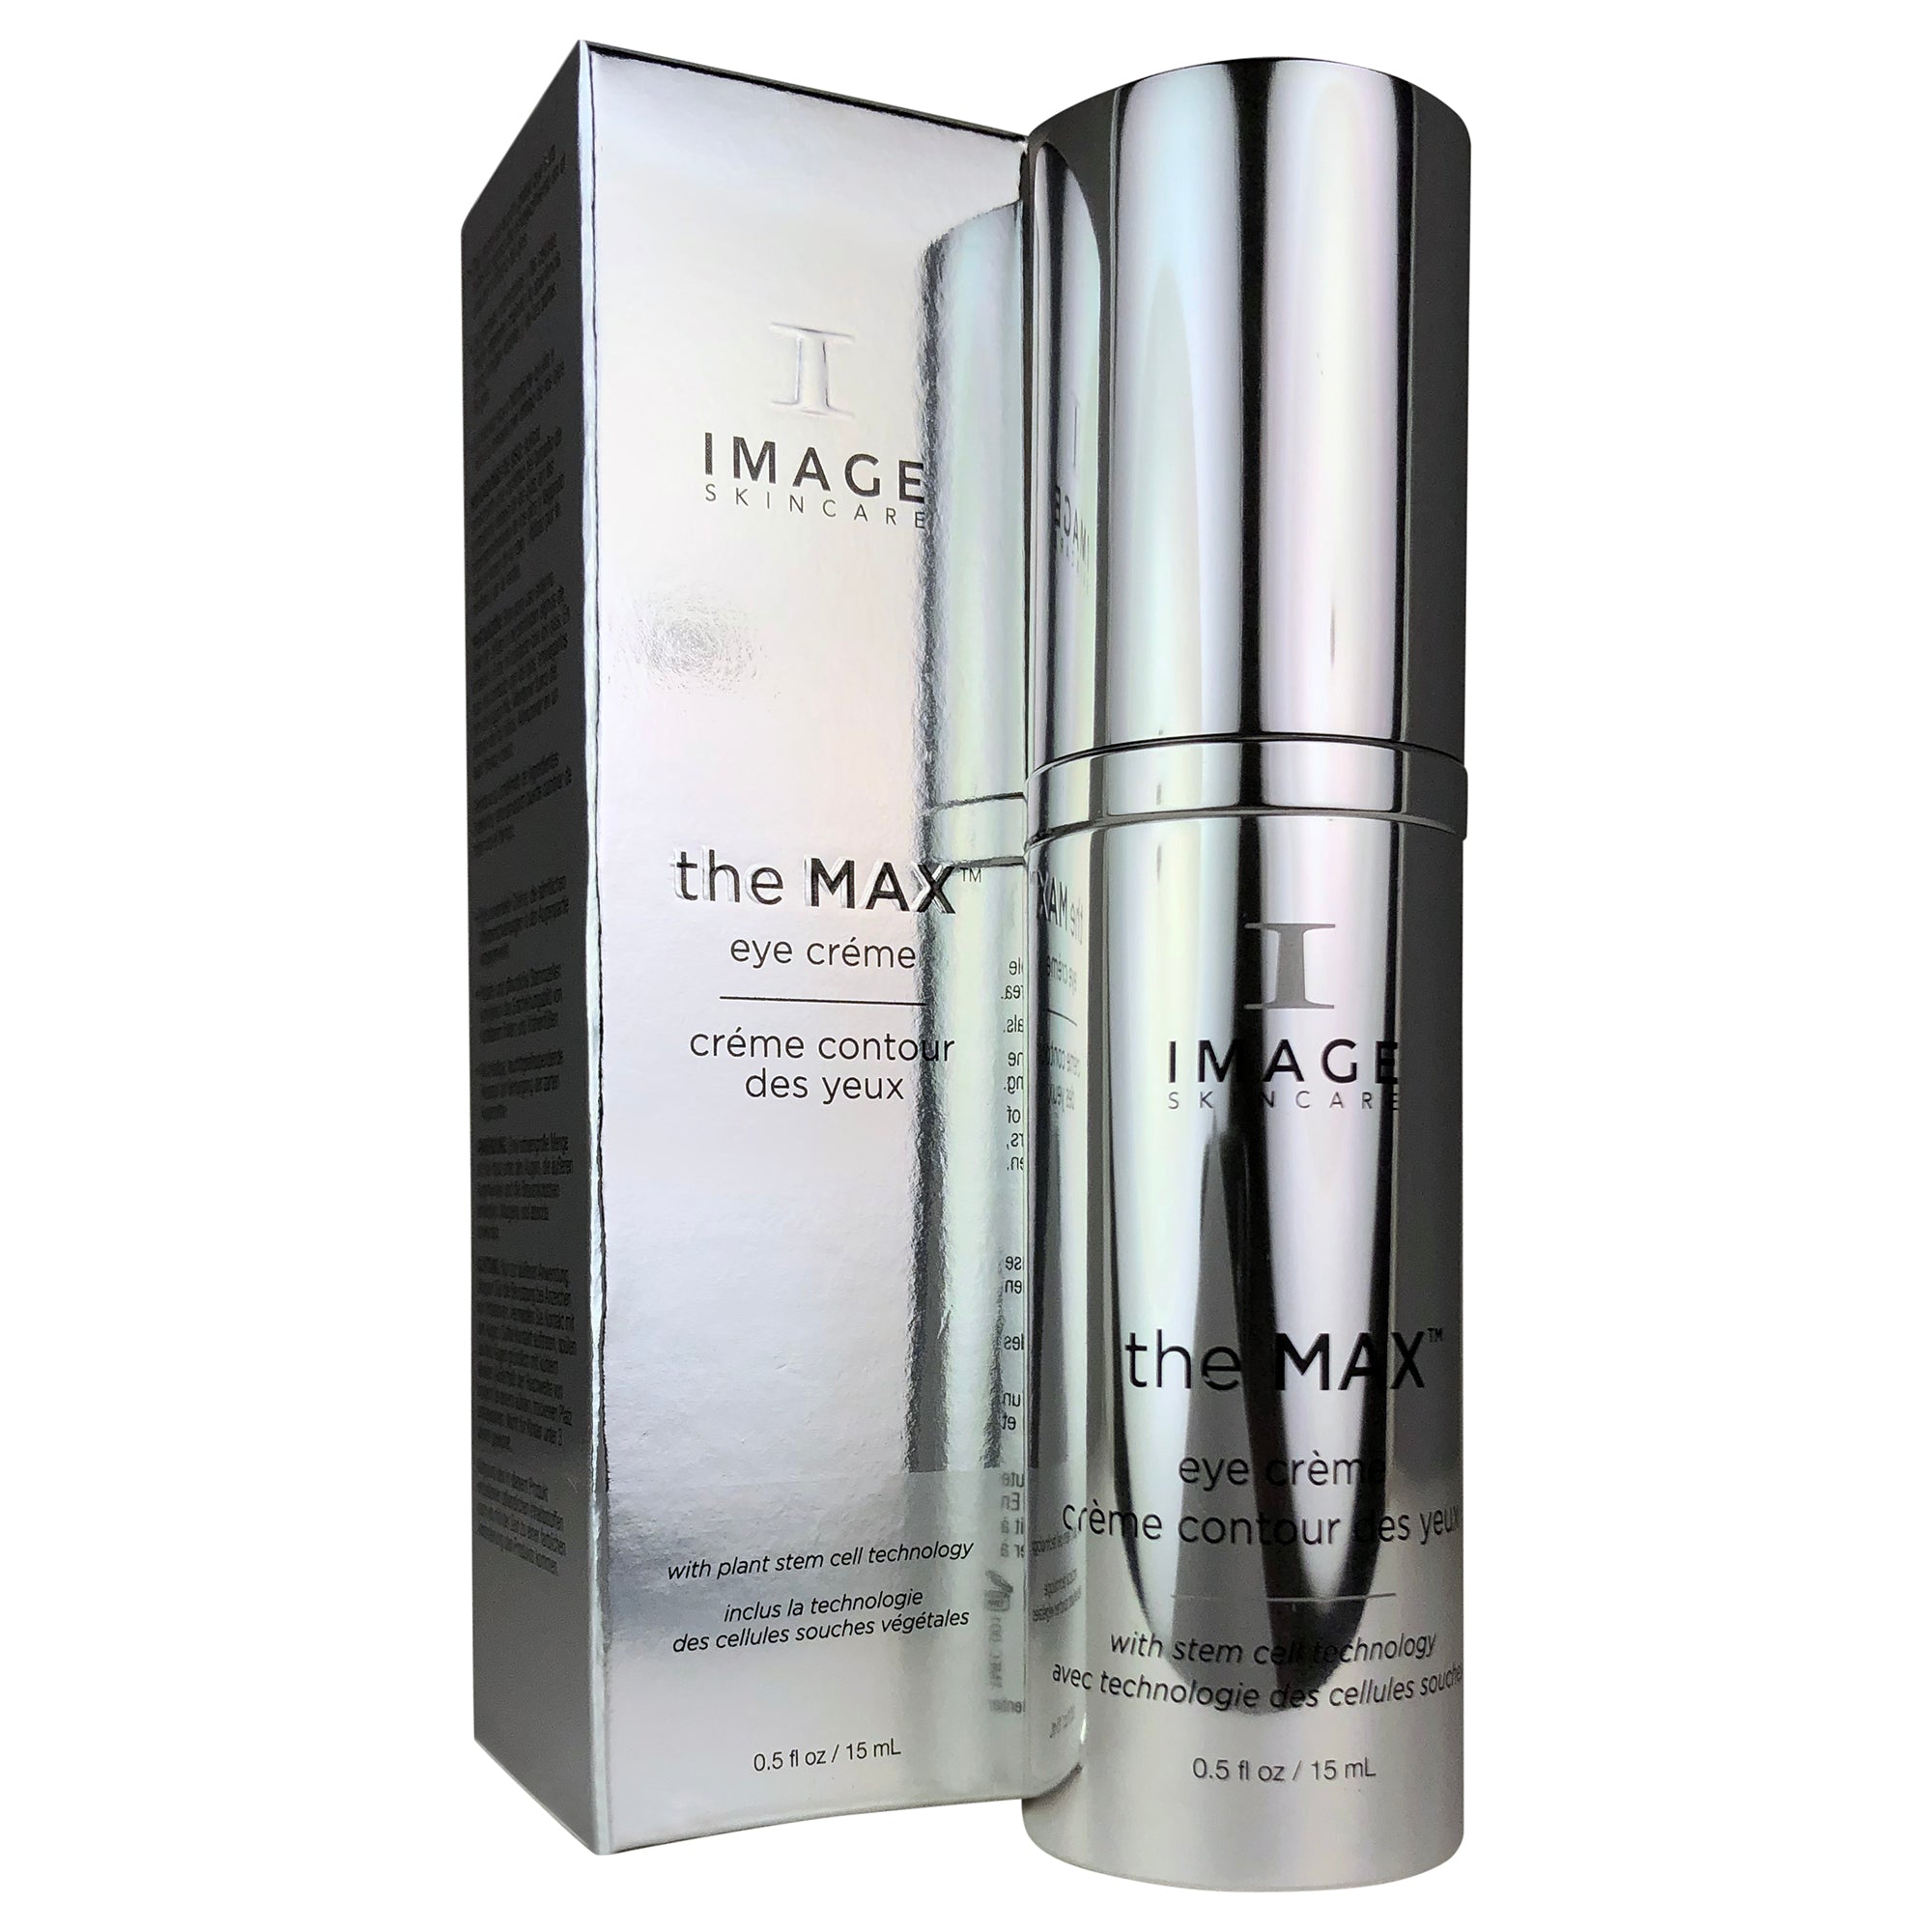 Image Skincare the MAX Stem Cell Eye Creme